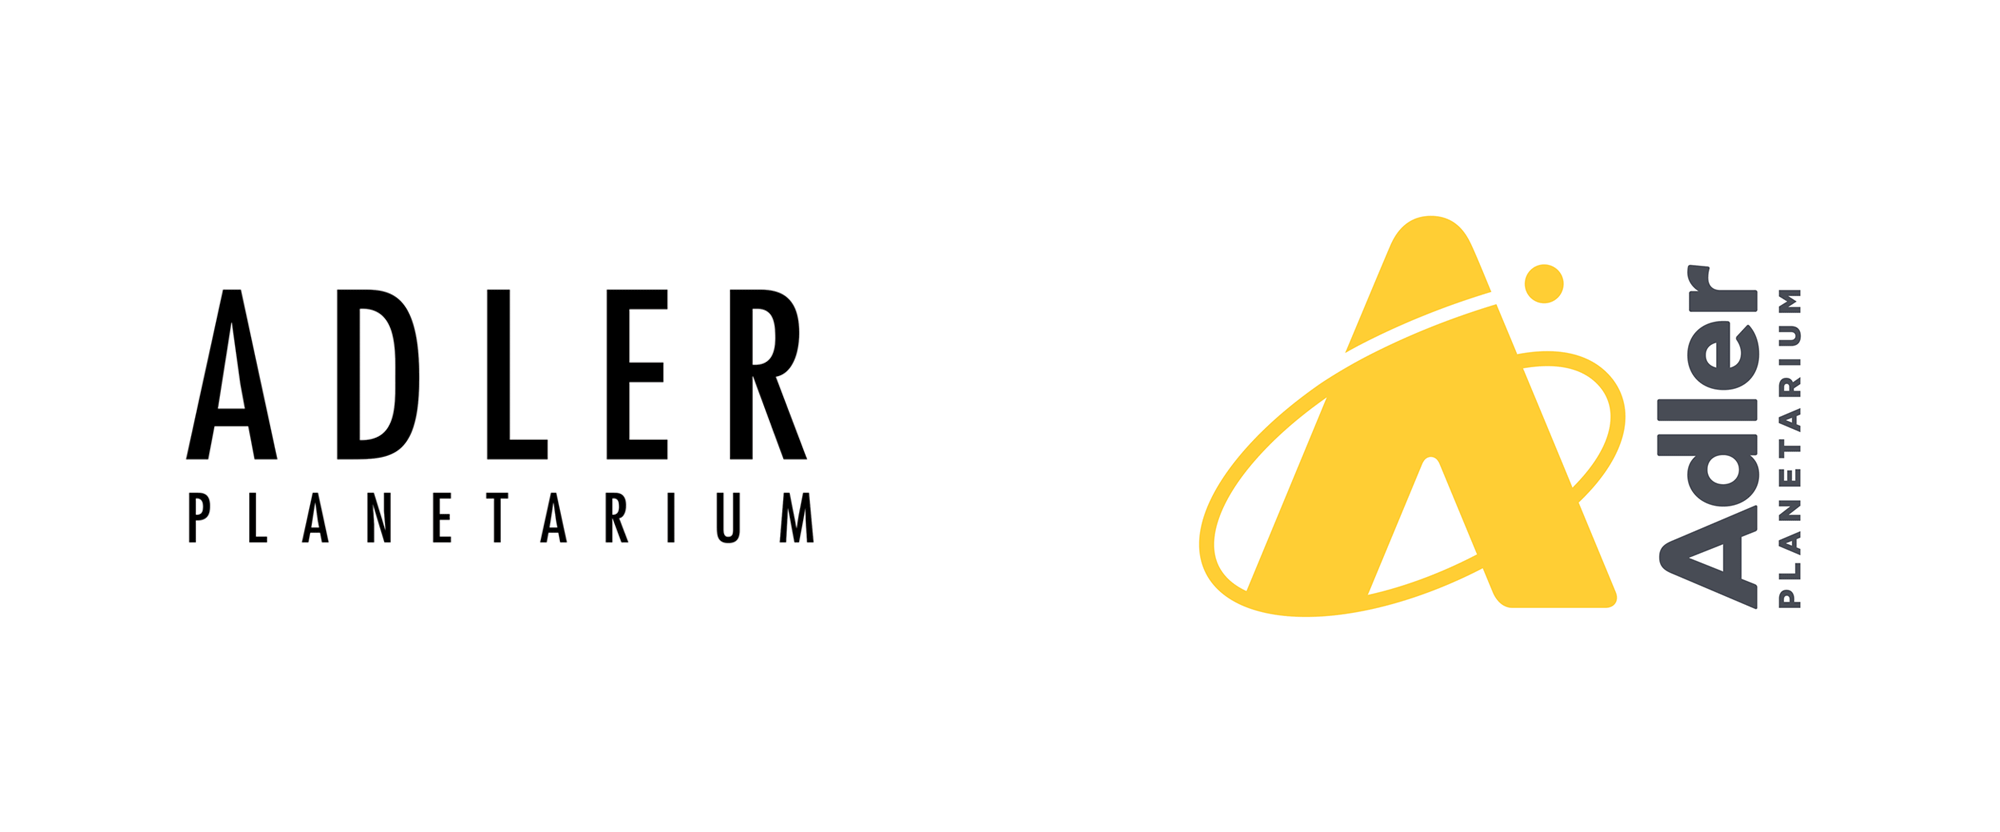 New Logo and Identity for Adler Planetarium by Pause for Thought and The Change Project